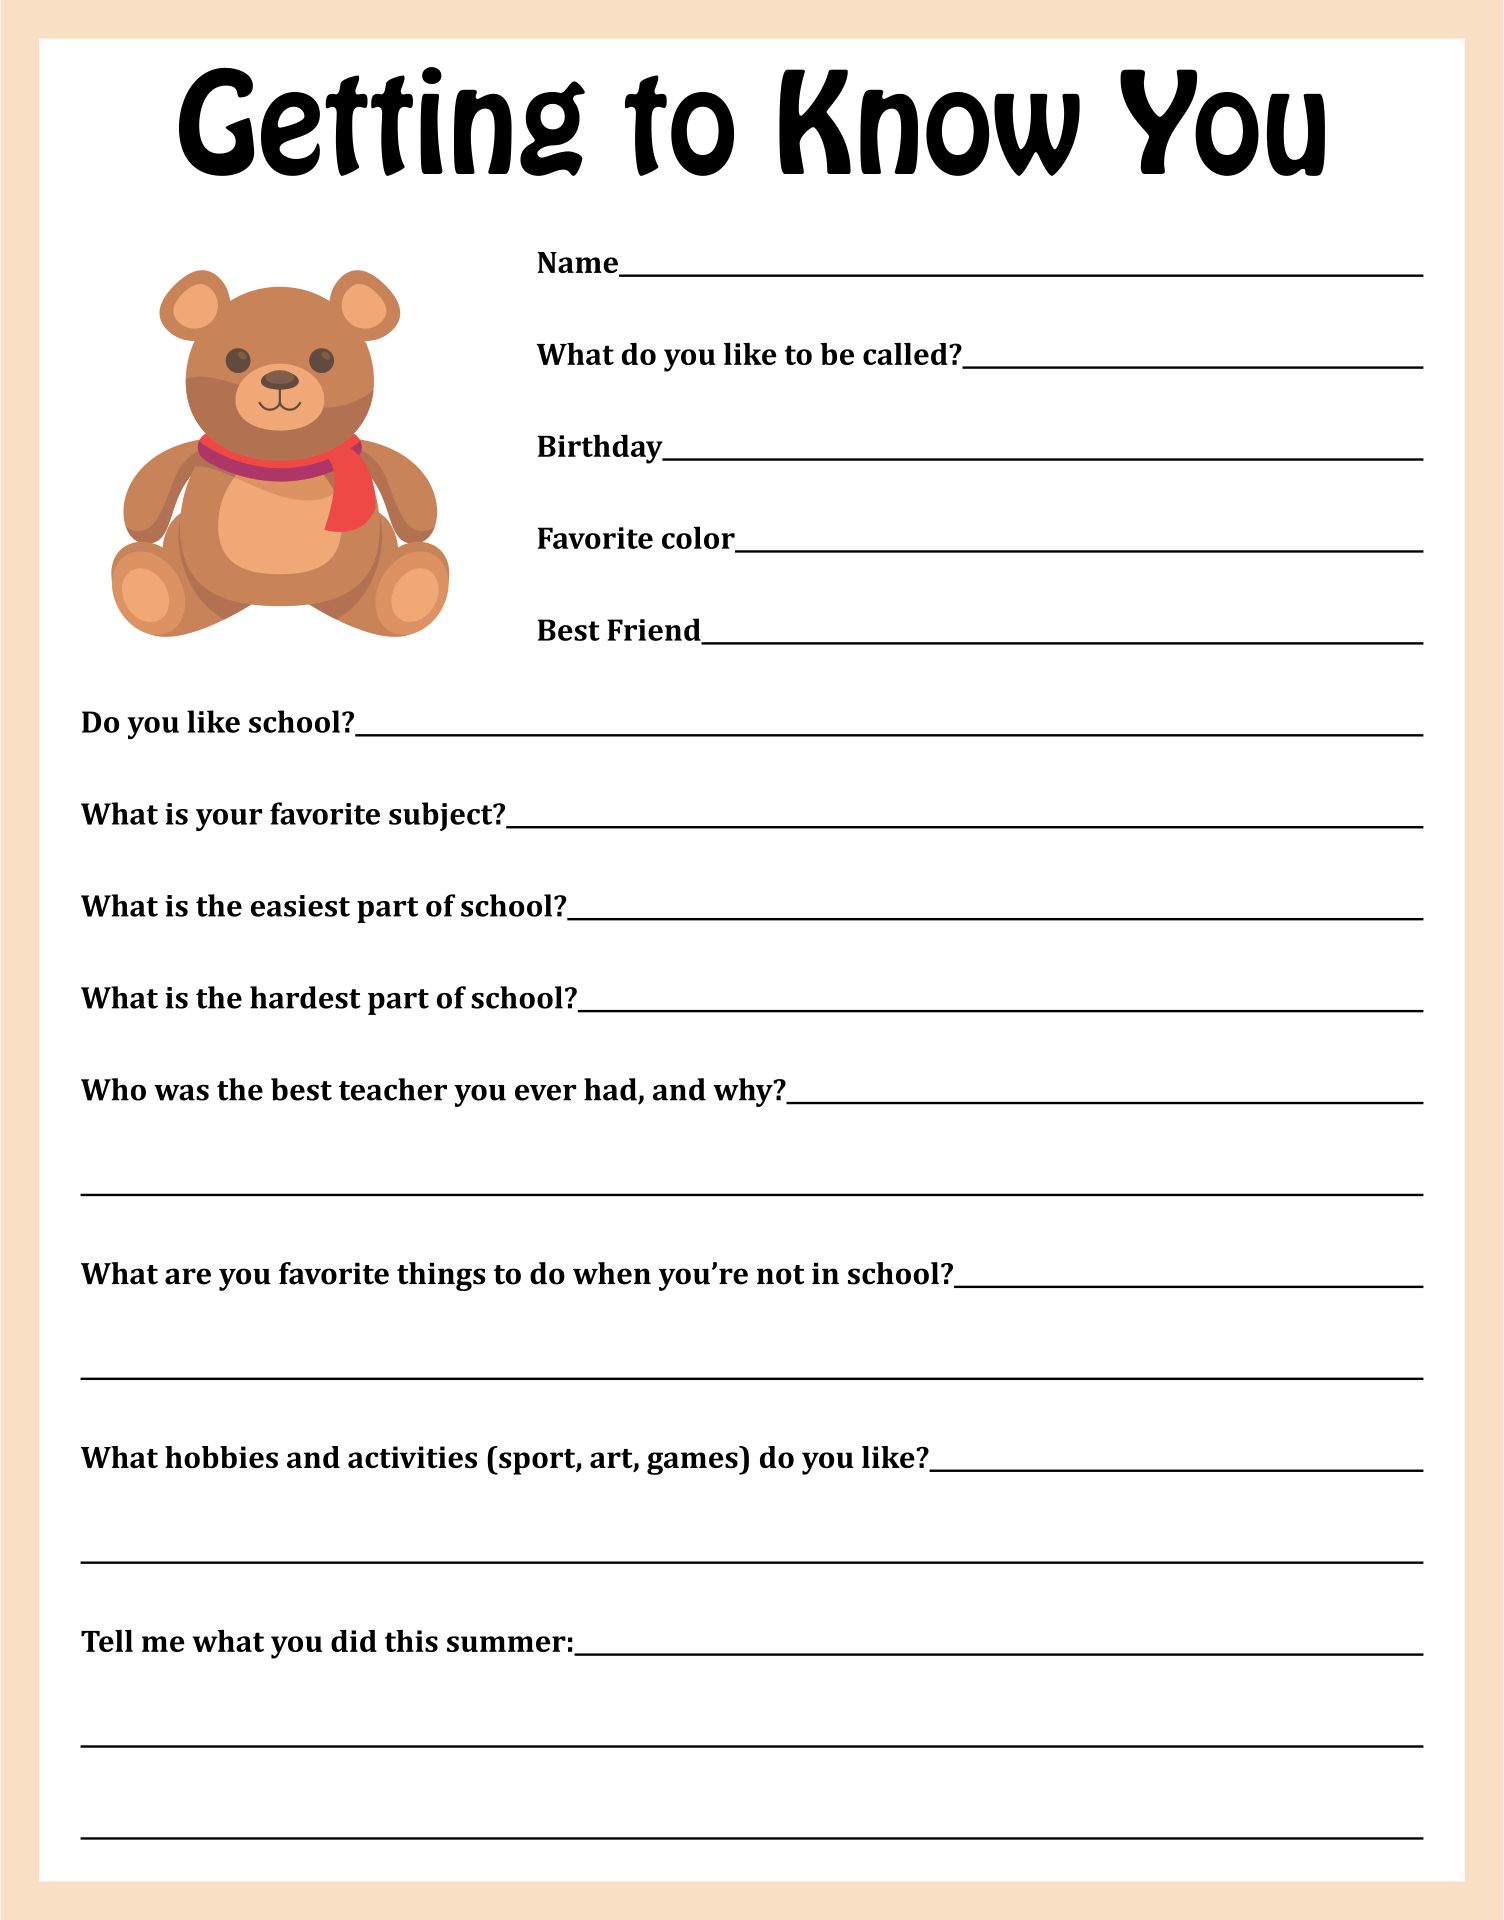 Getting To Know You Questions Printable We Analyzed Thousands Of 'get To.